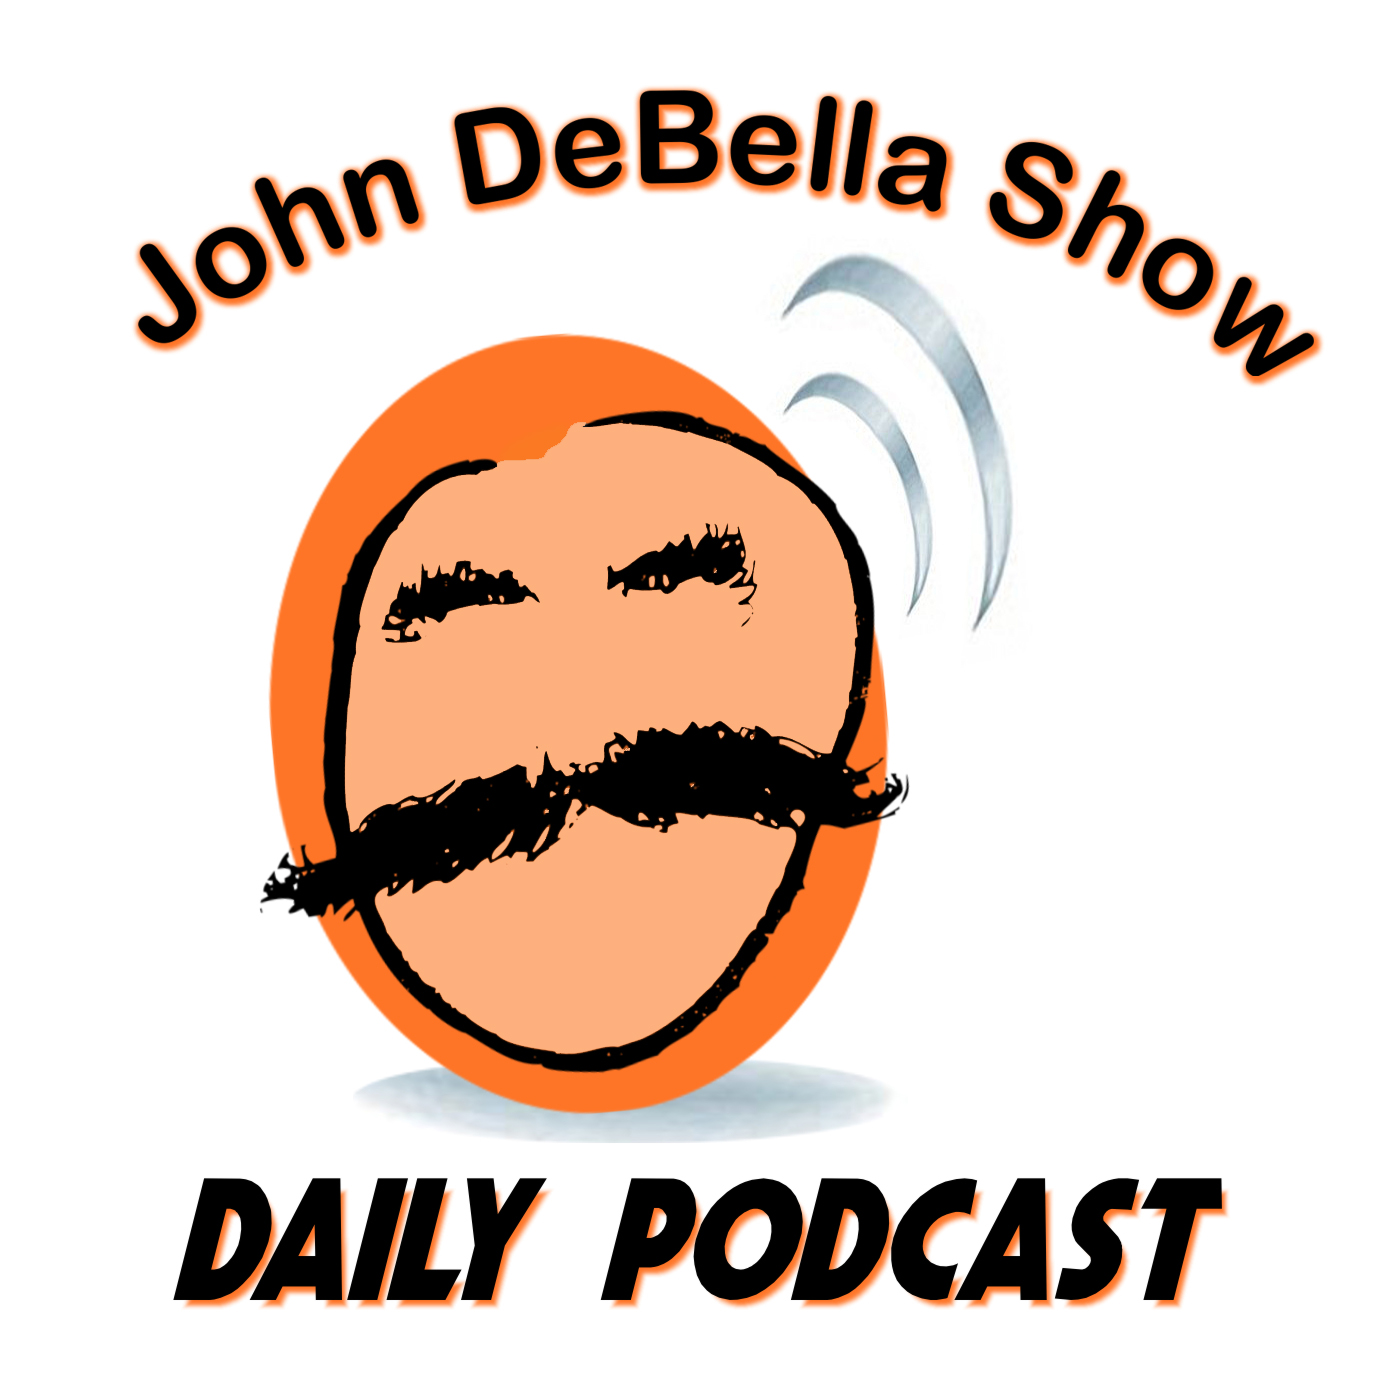 The Daily Podcast (06/15/21)